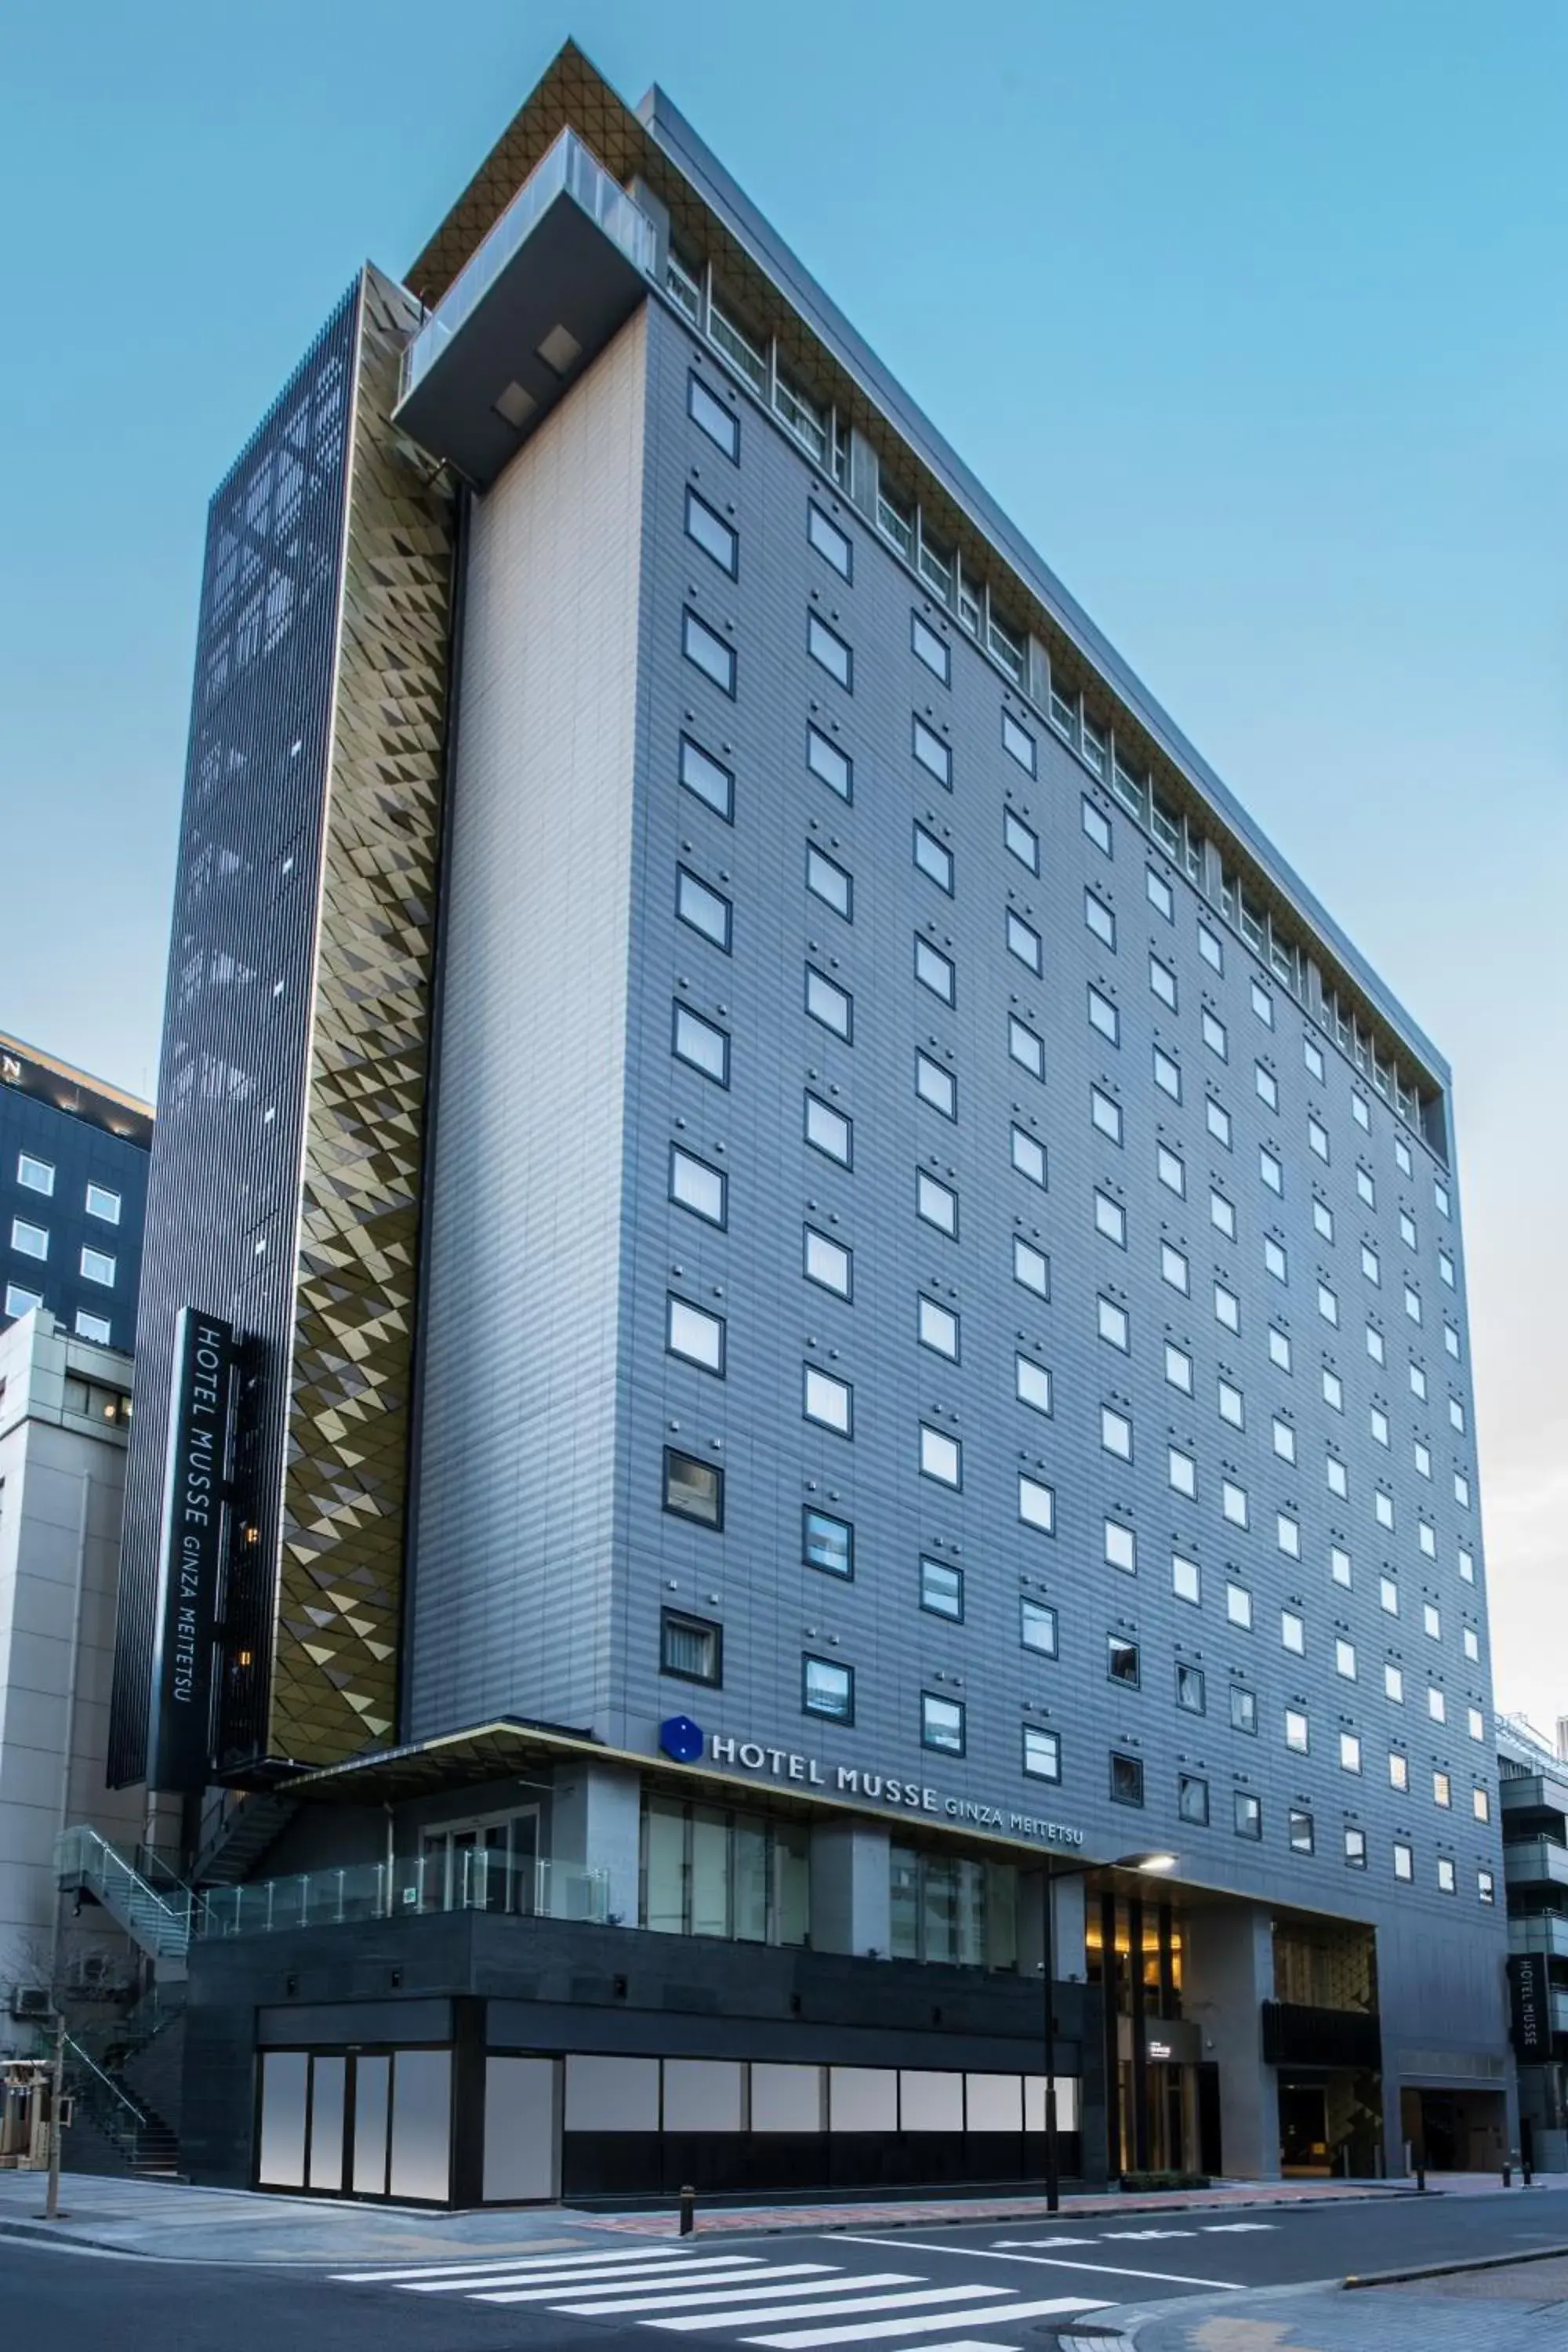 Property Building in HOTEL MUSSE GINZA MEITETSU